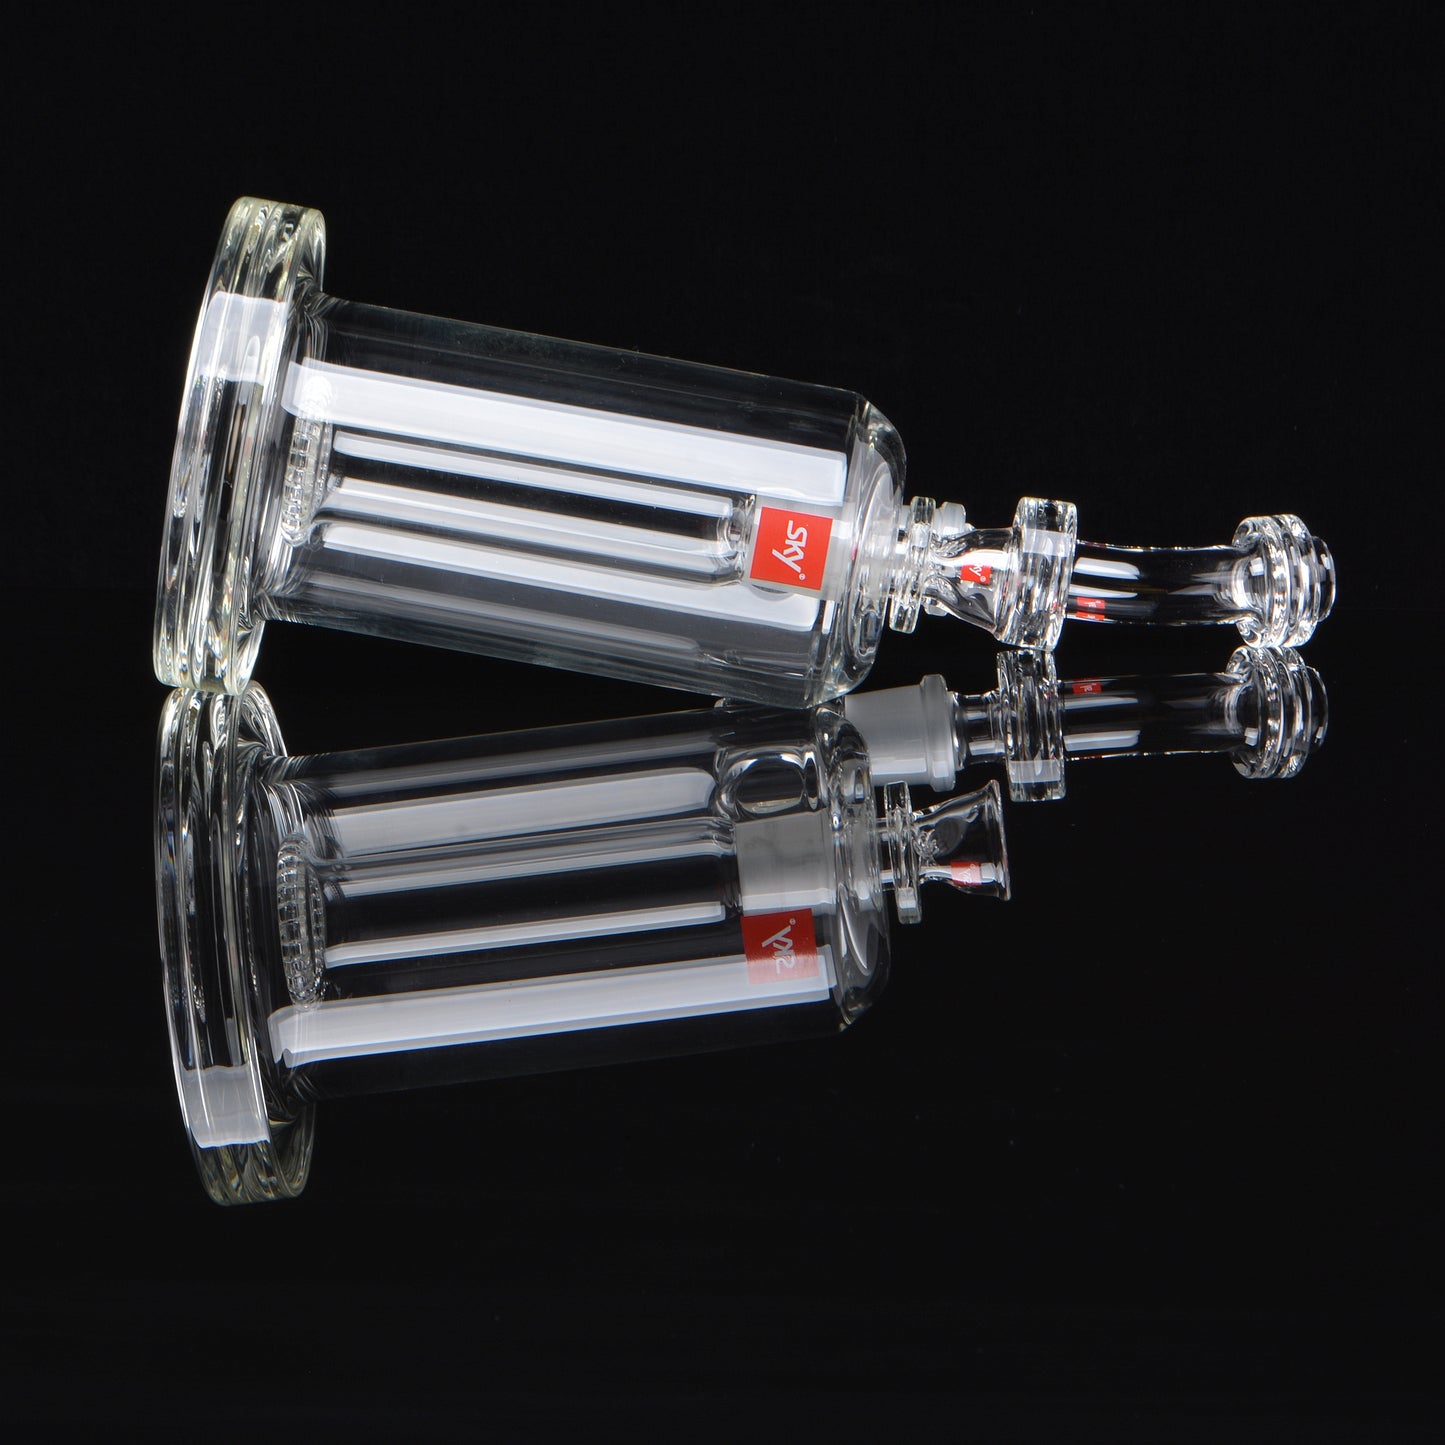 18mm Shower head Bubbler, with a removable mouthpiece, laying on its side